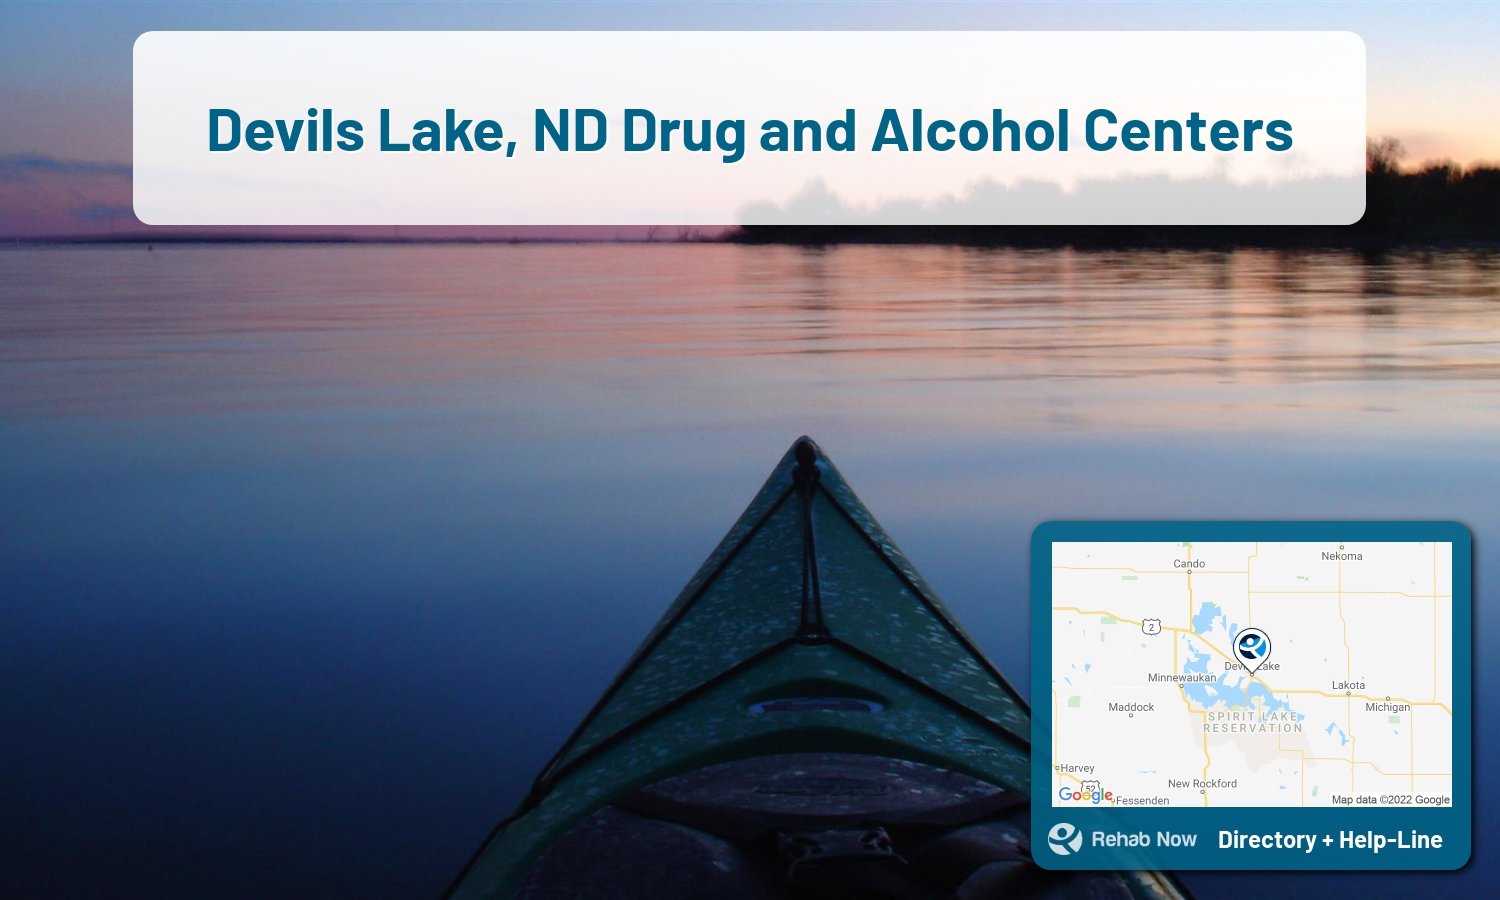 Drug rehab and alcohol treatment services nearby Devils Lake, ND. Need help choosing a treatment program? Call our free hotline!